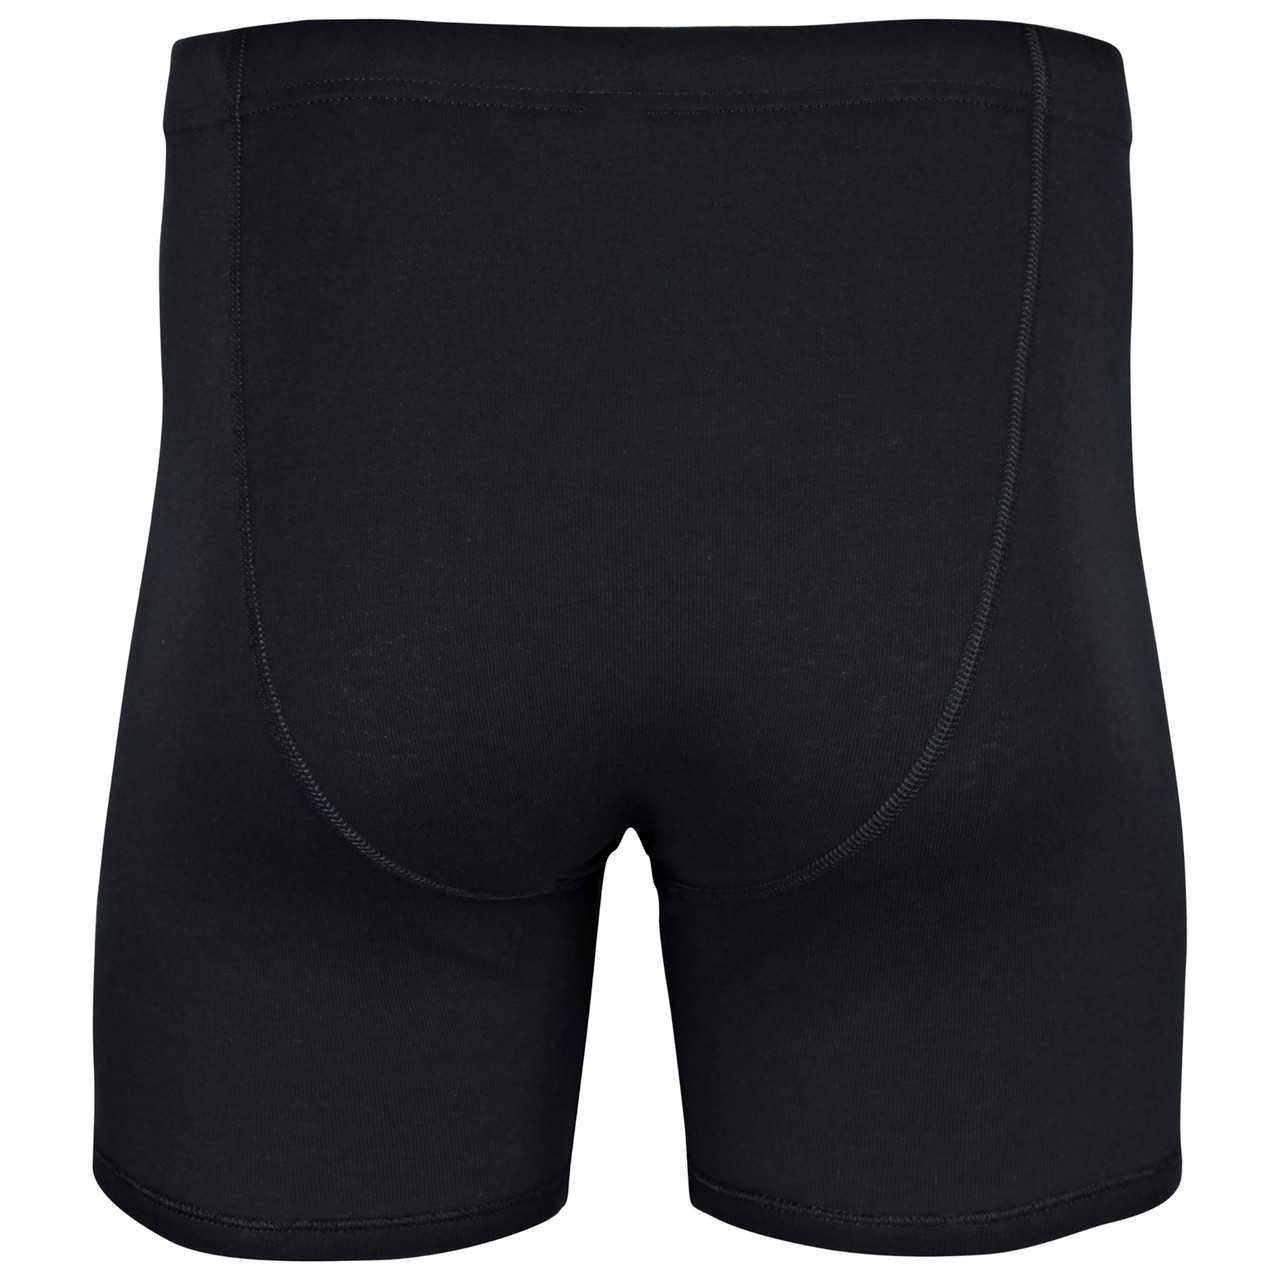 G11462, Men's Covered Waistband Boxer Brief